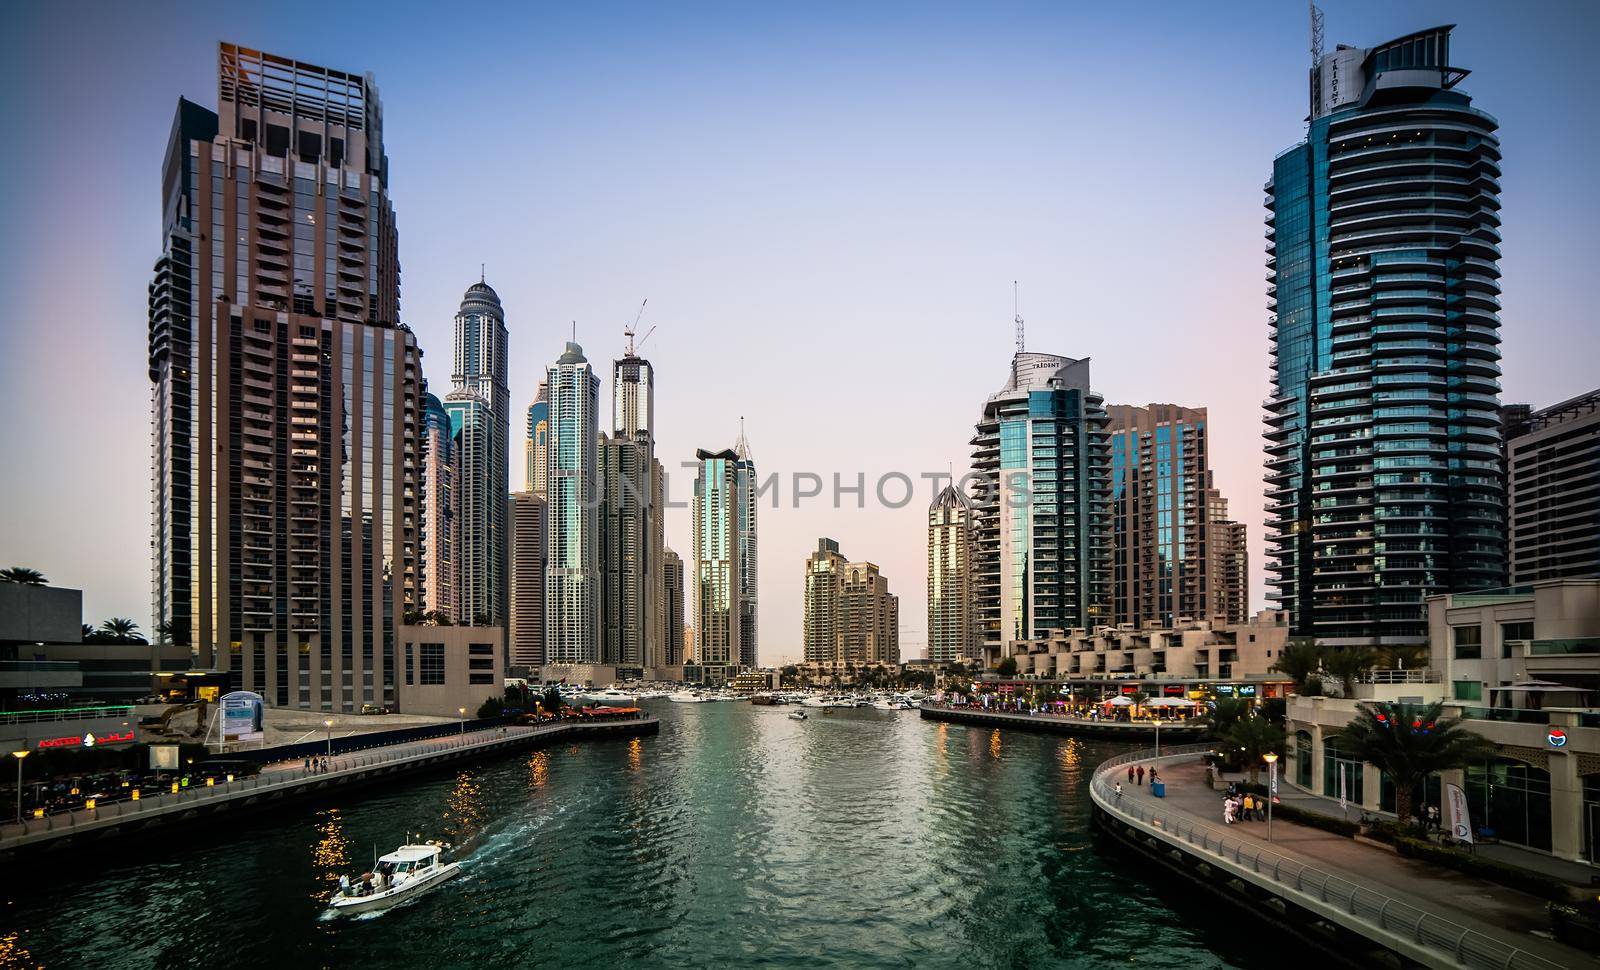 Dubai, United Arab Emirates - December 14, 2013: Panoramic view with modern skyscrapers and water channel of Dubai Marina in evening, United Arab Emirates